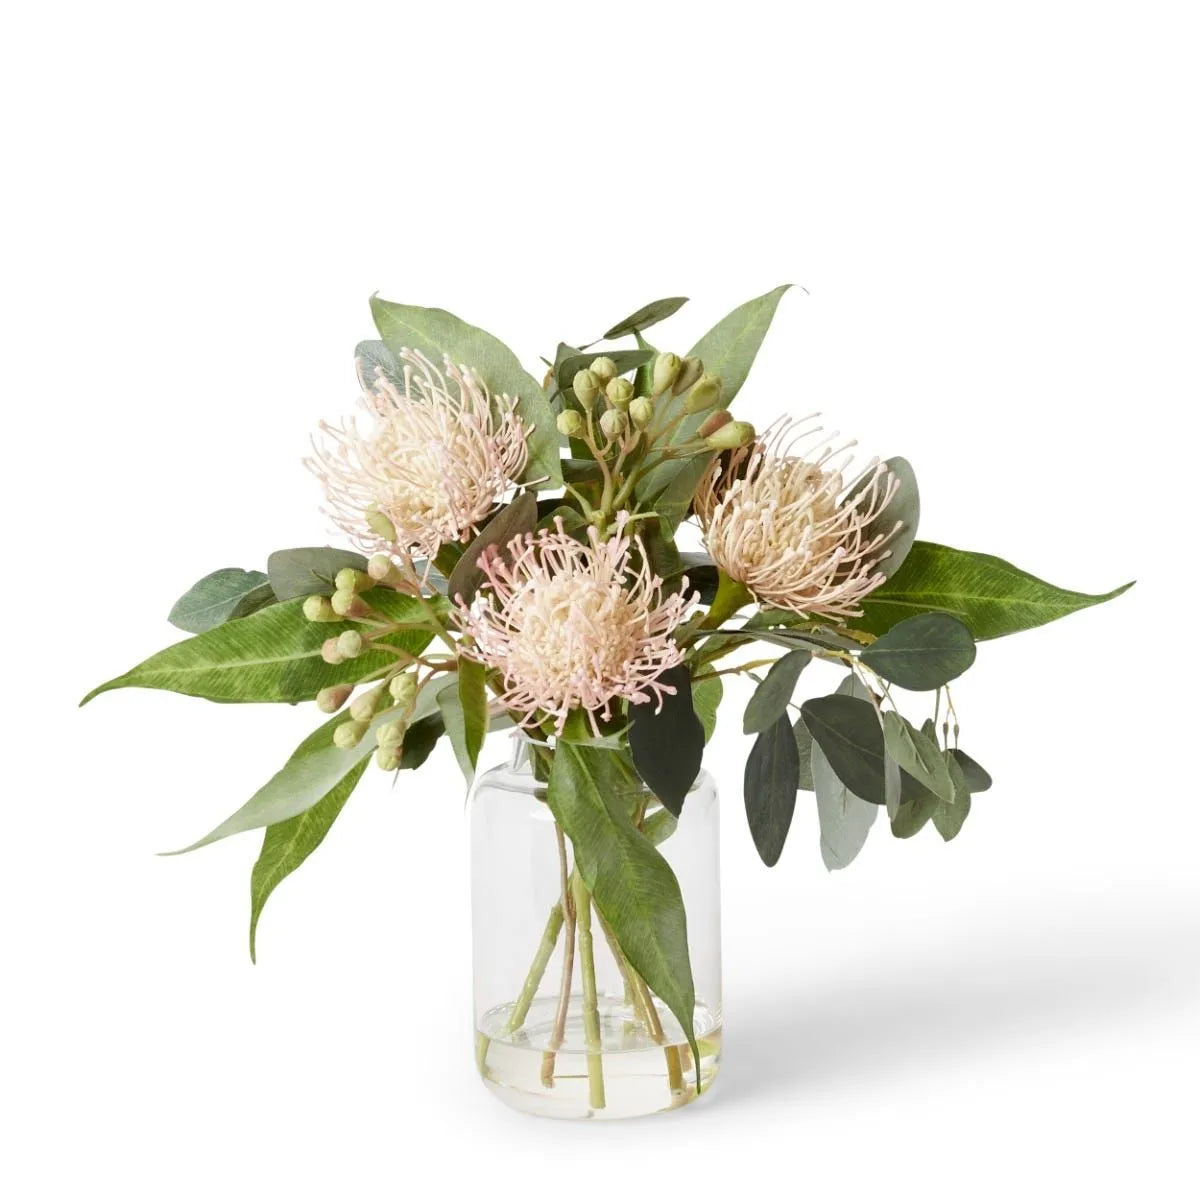 Display the Pin Cushion Bouquet in Tillie Vase in your home to bring lush color and a touch of nature to your space. Crafted with remarkable realism, this 38cm bouquet requires no maintenance, making it a hassle-free addition to your decor.